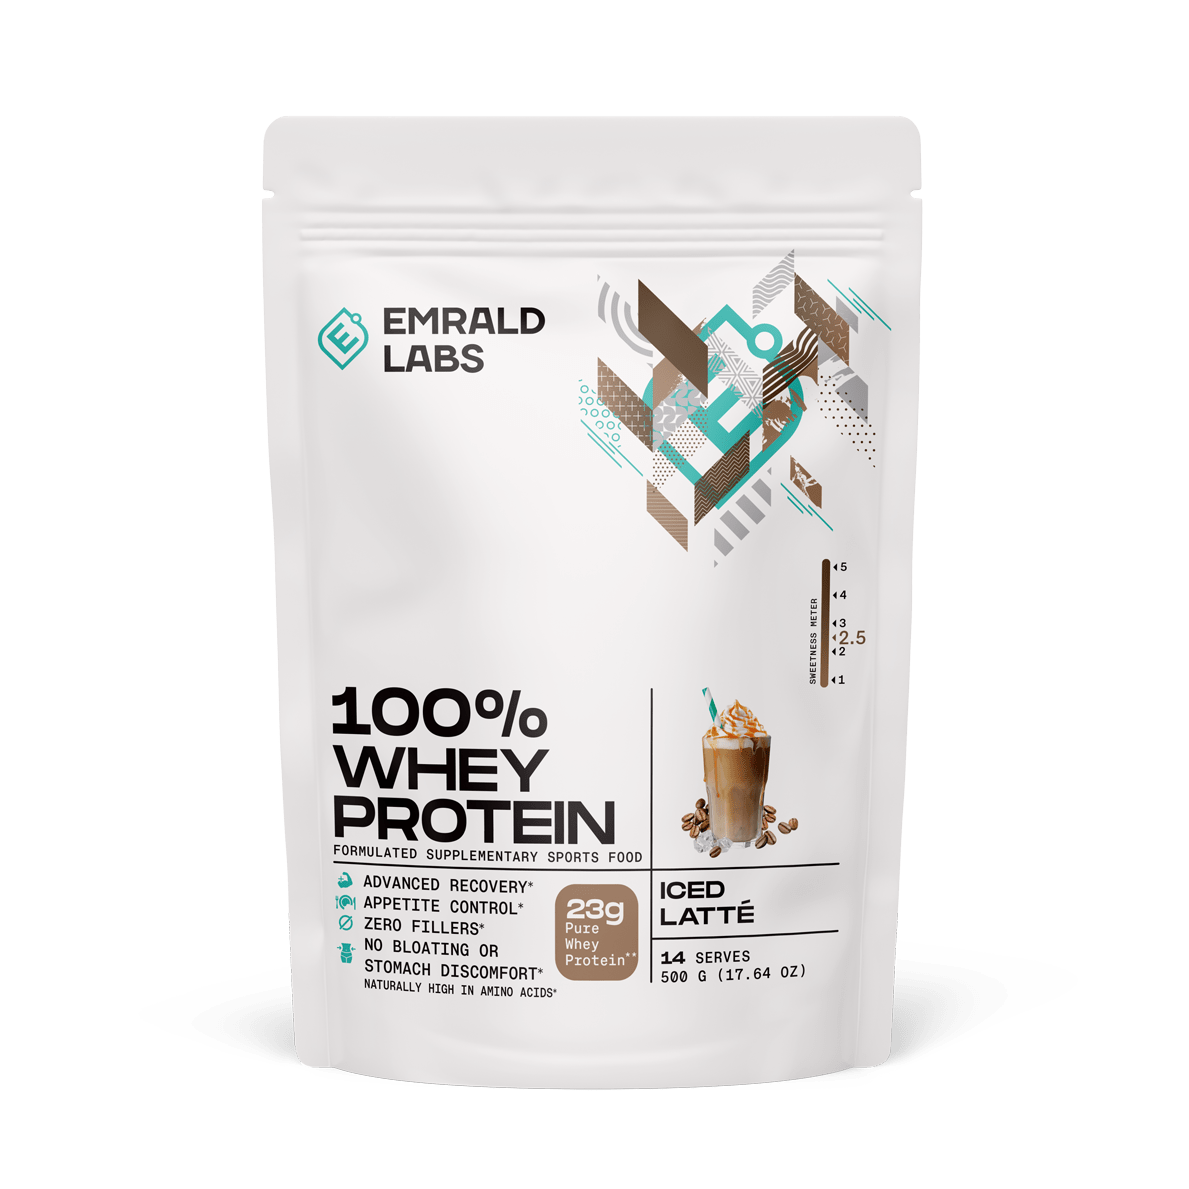 Emrald Labs configurable 500g / ICED LATTE Emrald Labs - 100% Whey Protein